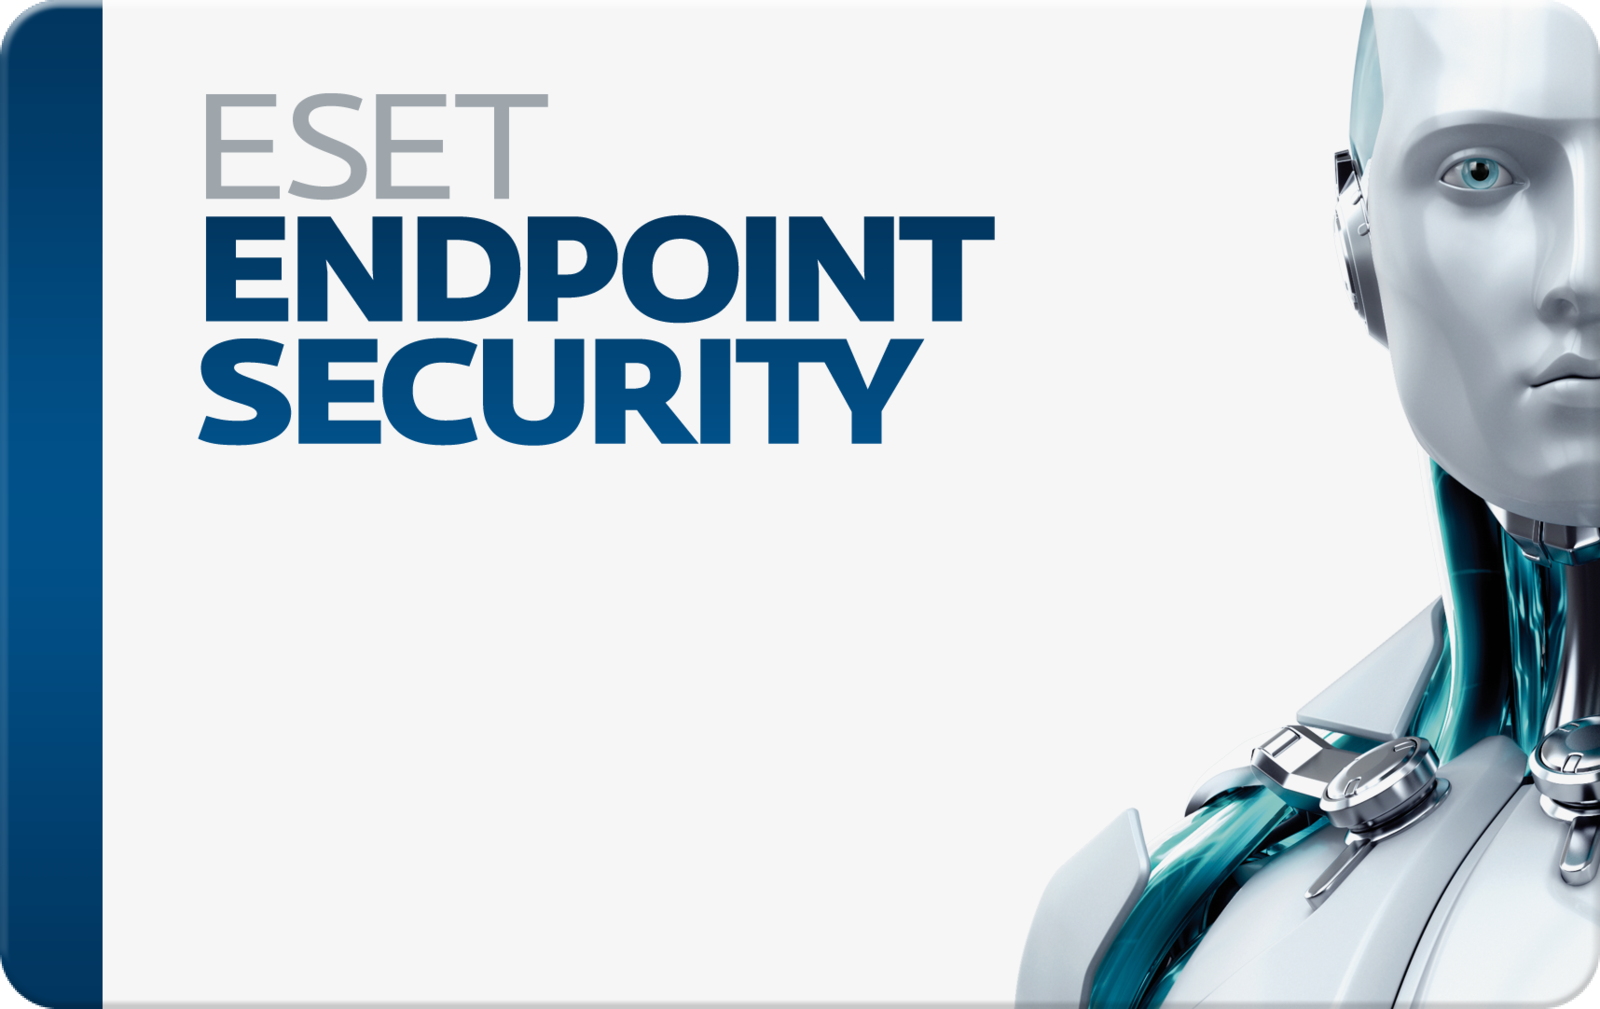 ESET Endpoint Security 10.1.2046.0 download